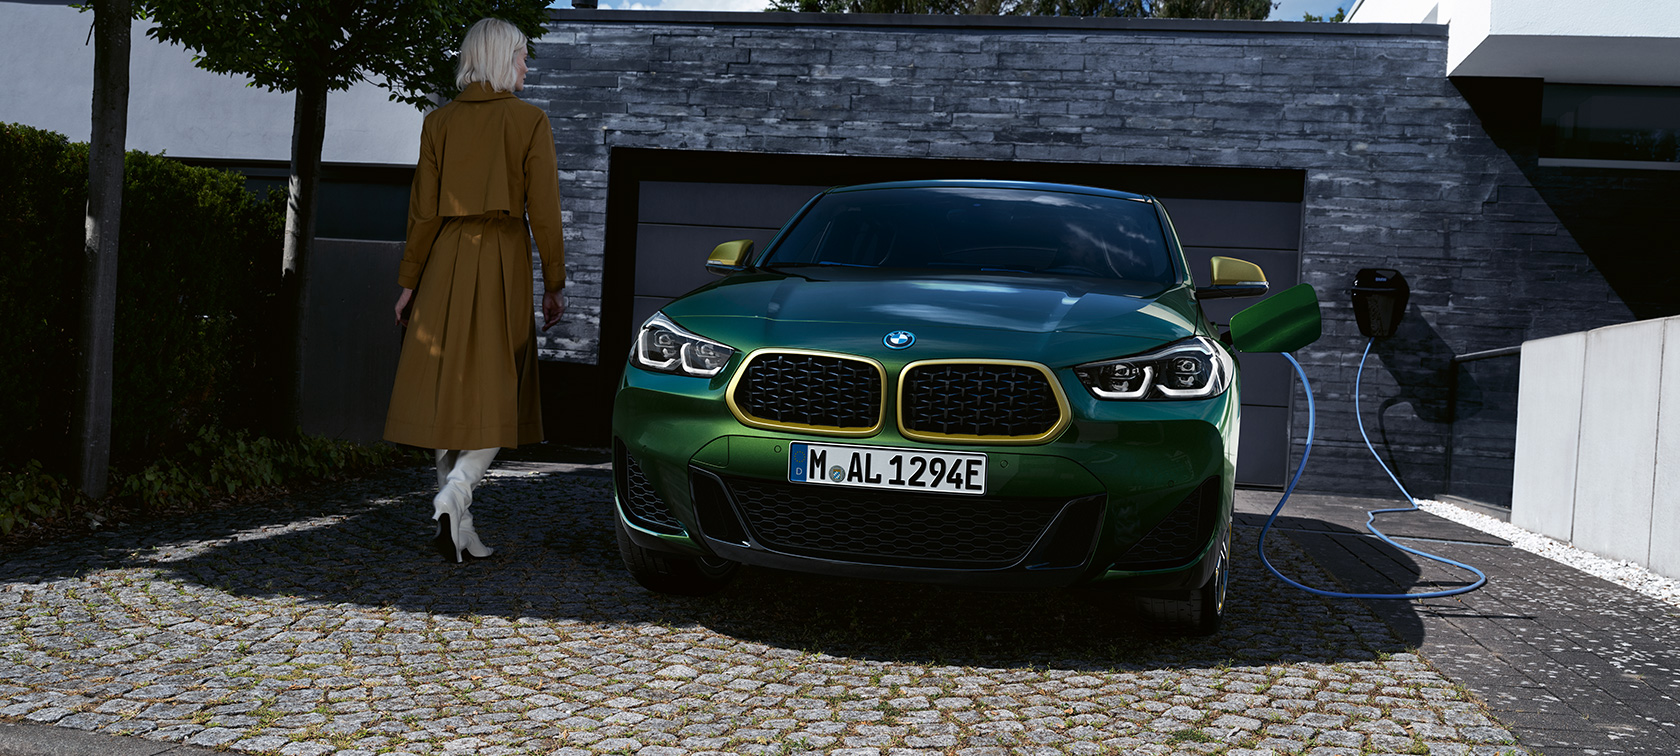 Front view in charging situation with model on left BMW X2 F39 Sanremo Green metallic